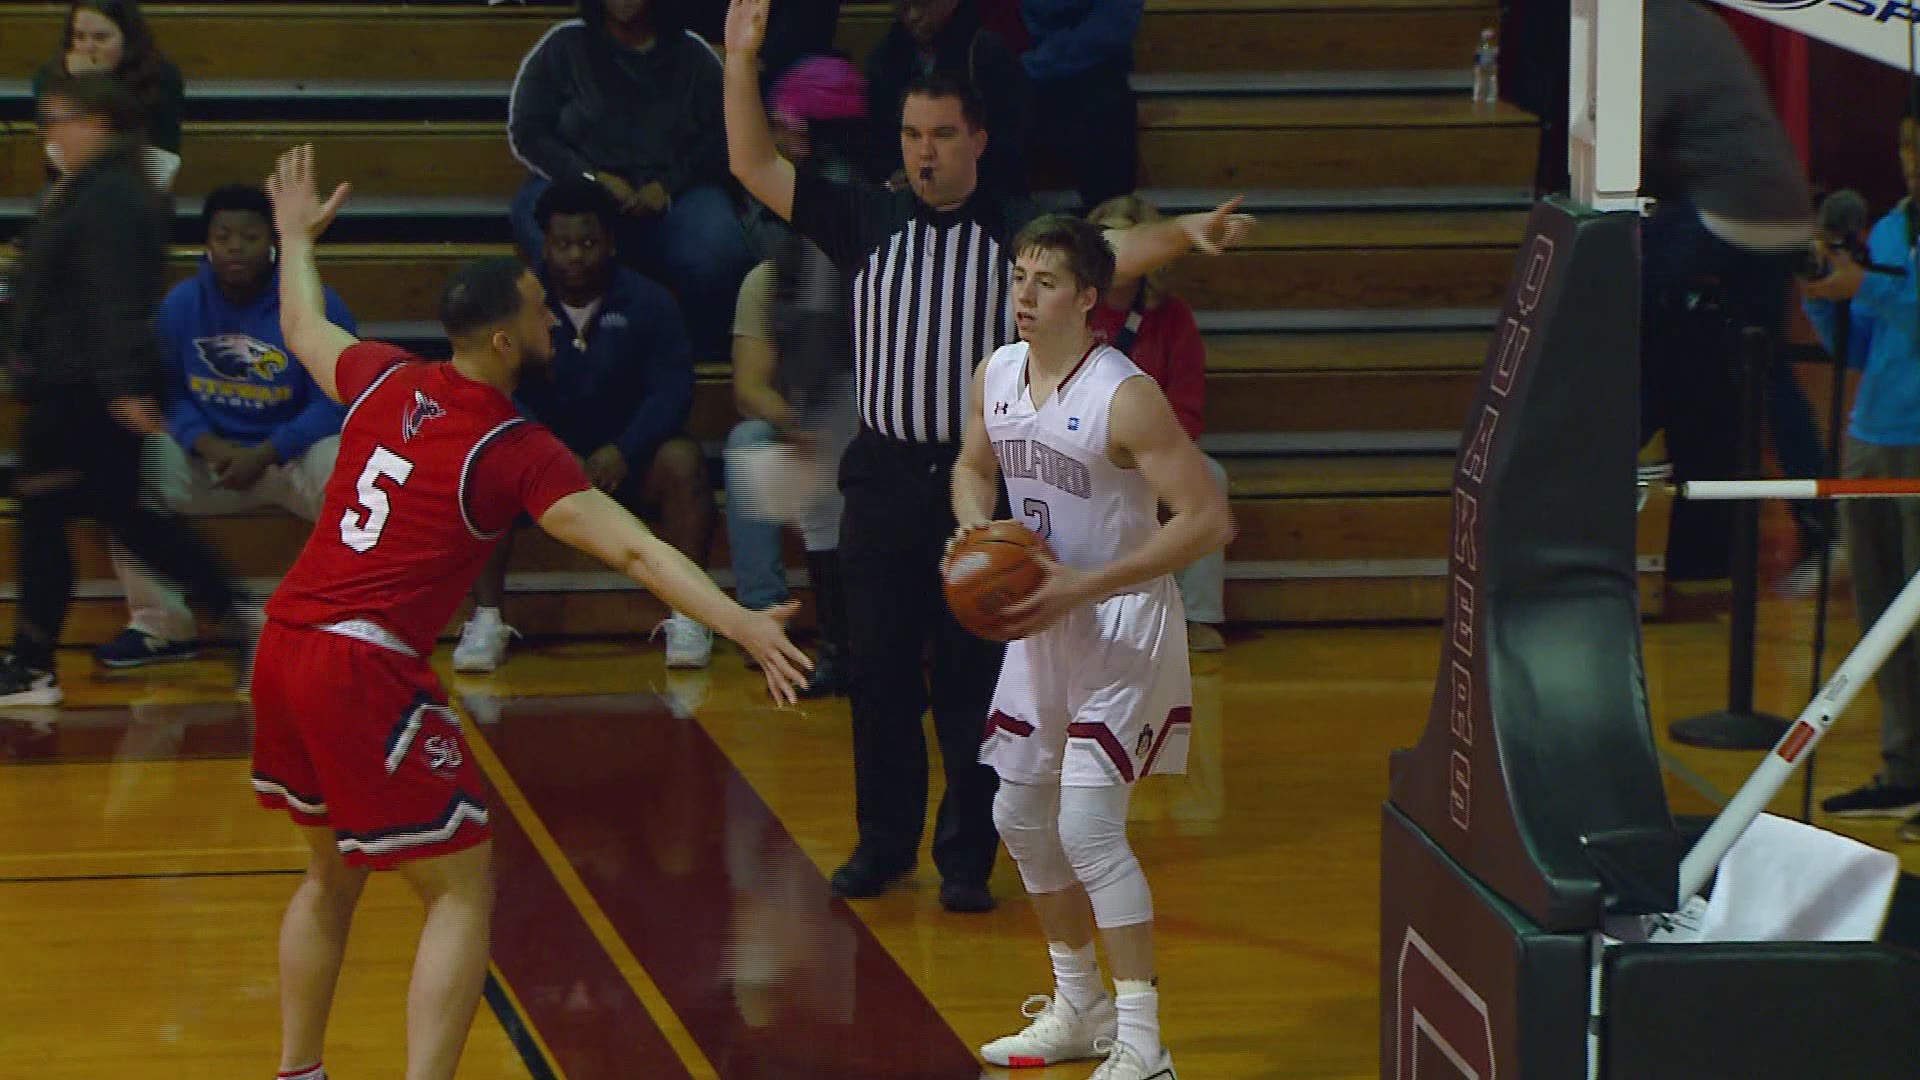 Kyler Gregory scored a game-high 18 points as the Quakers come away with the 85-52 win.